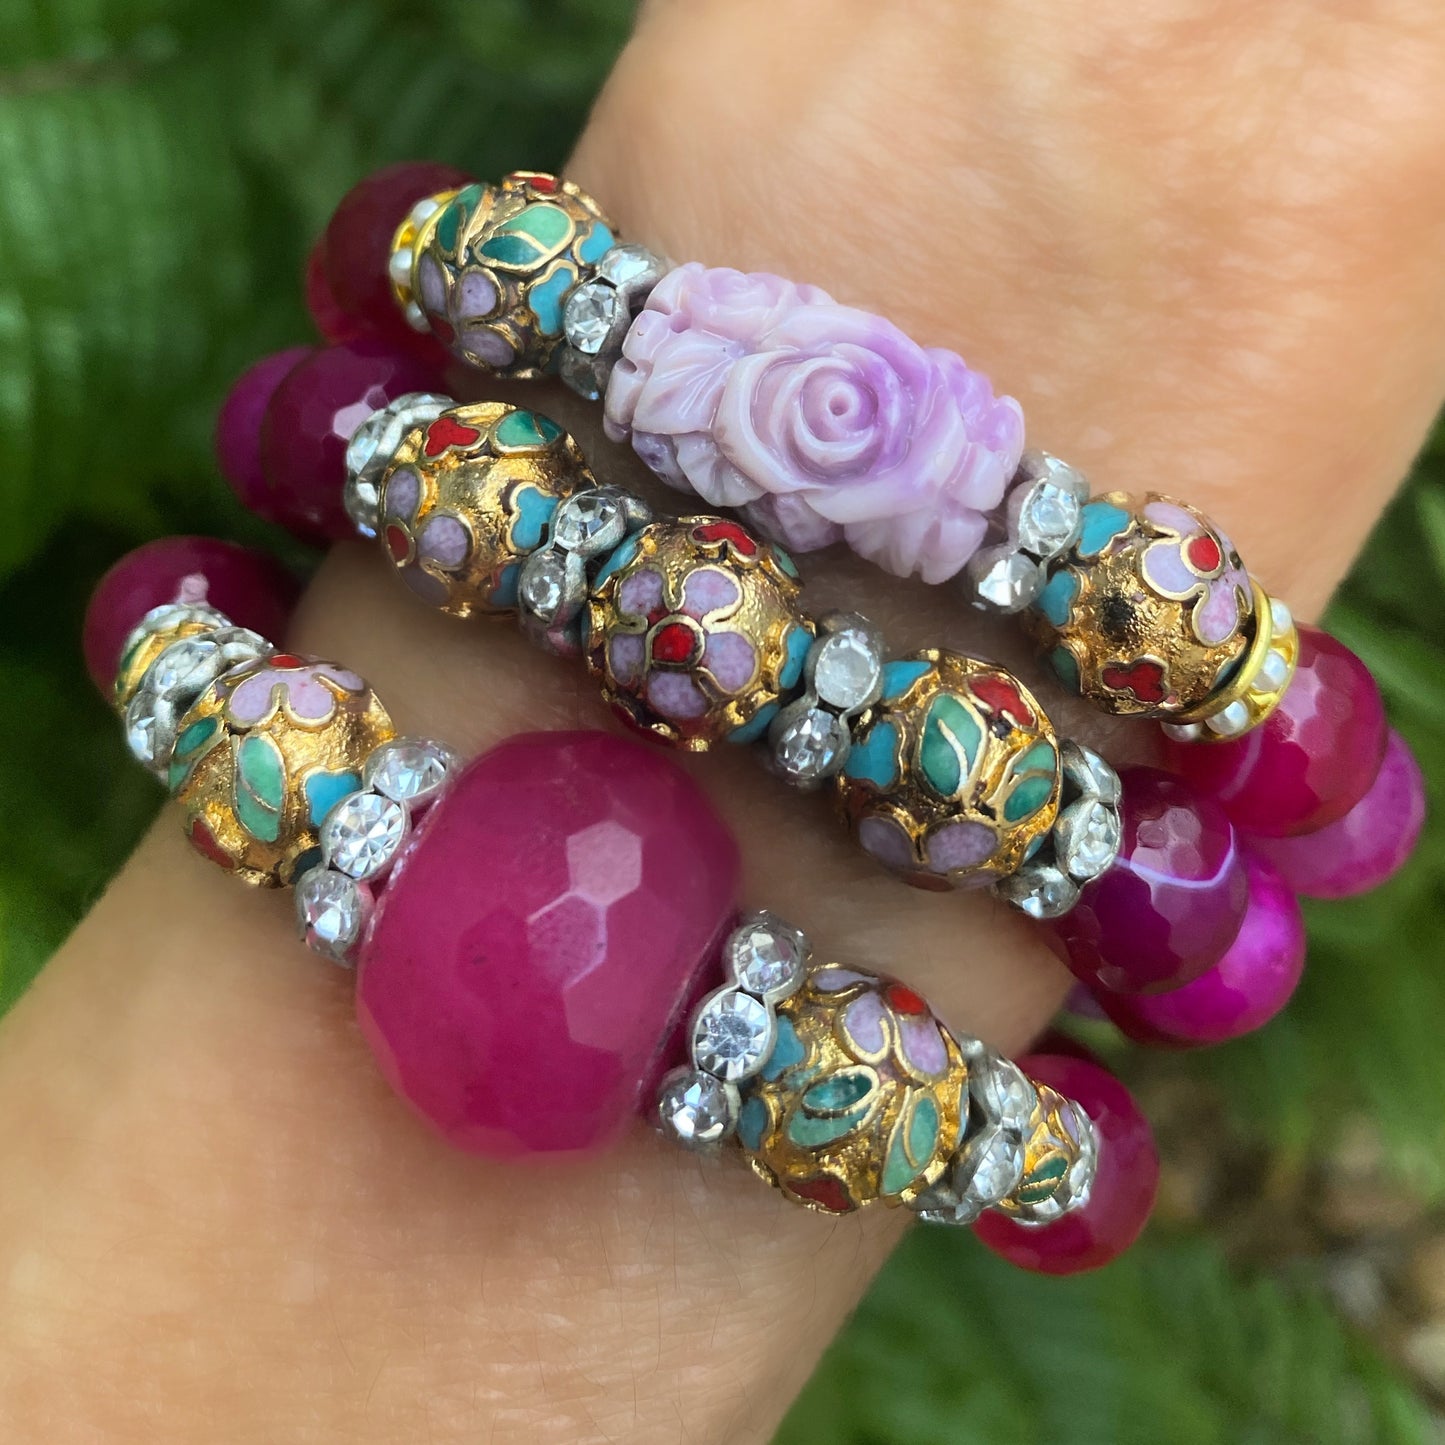 Shades of Pink Fuchsia Agate and Vintage Cloissone Mini Stacker